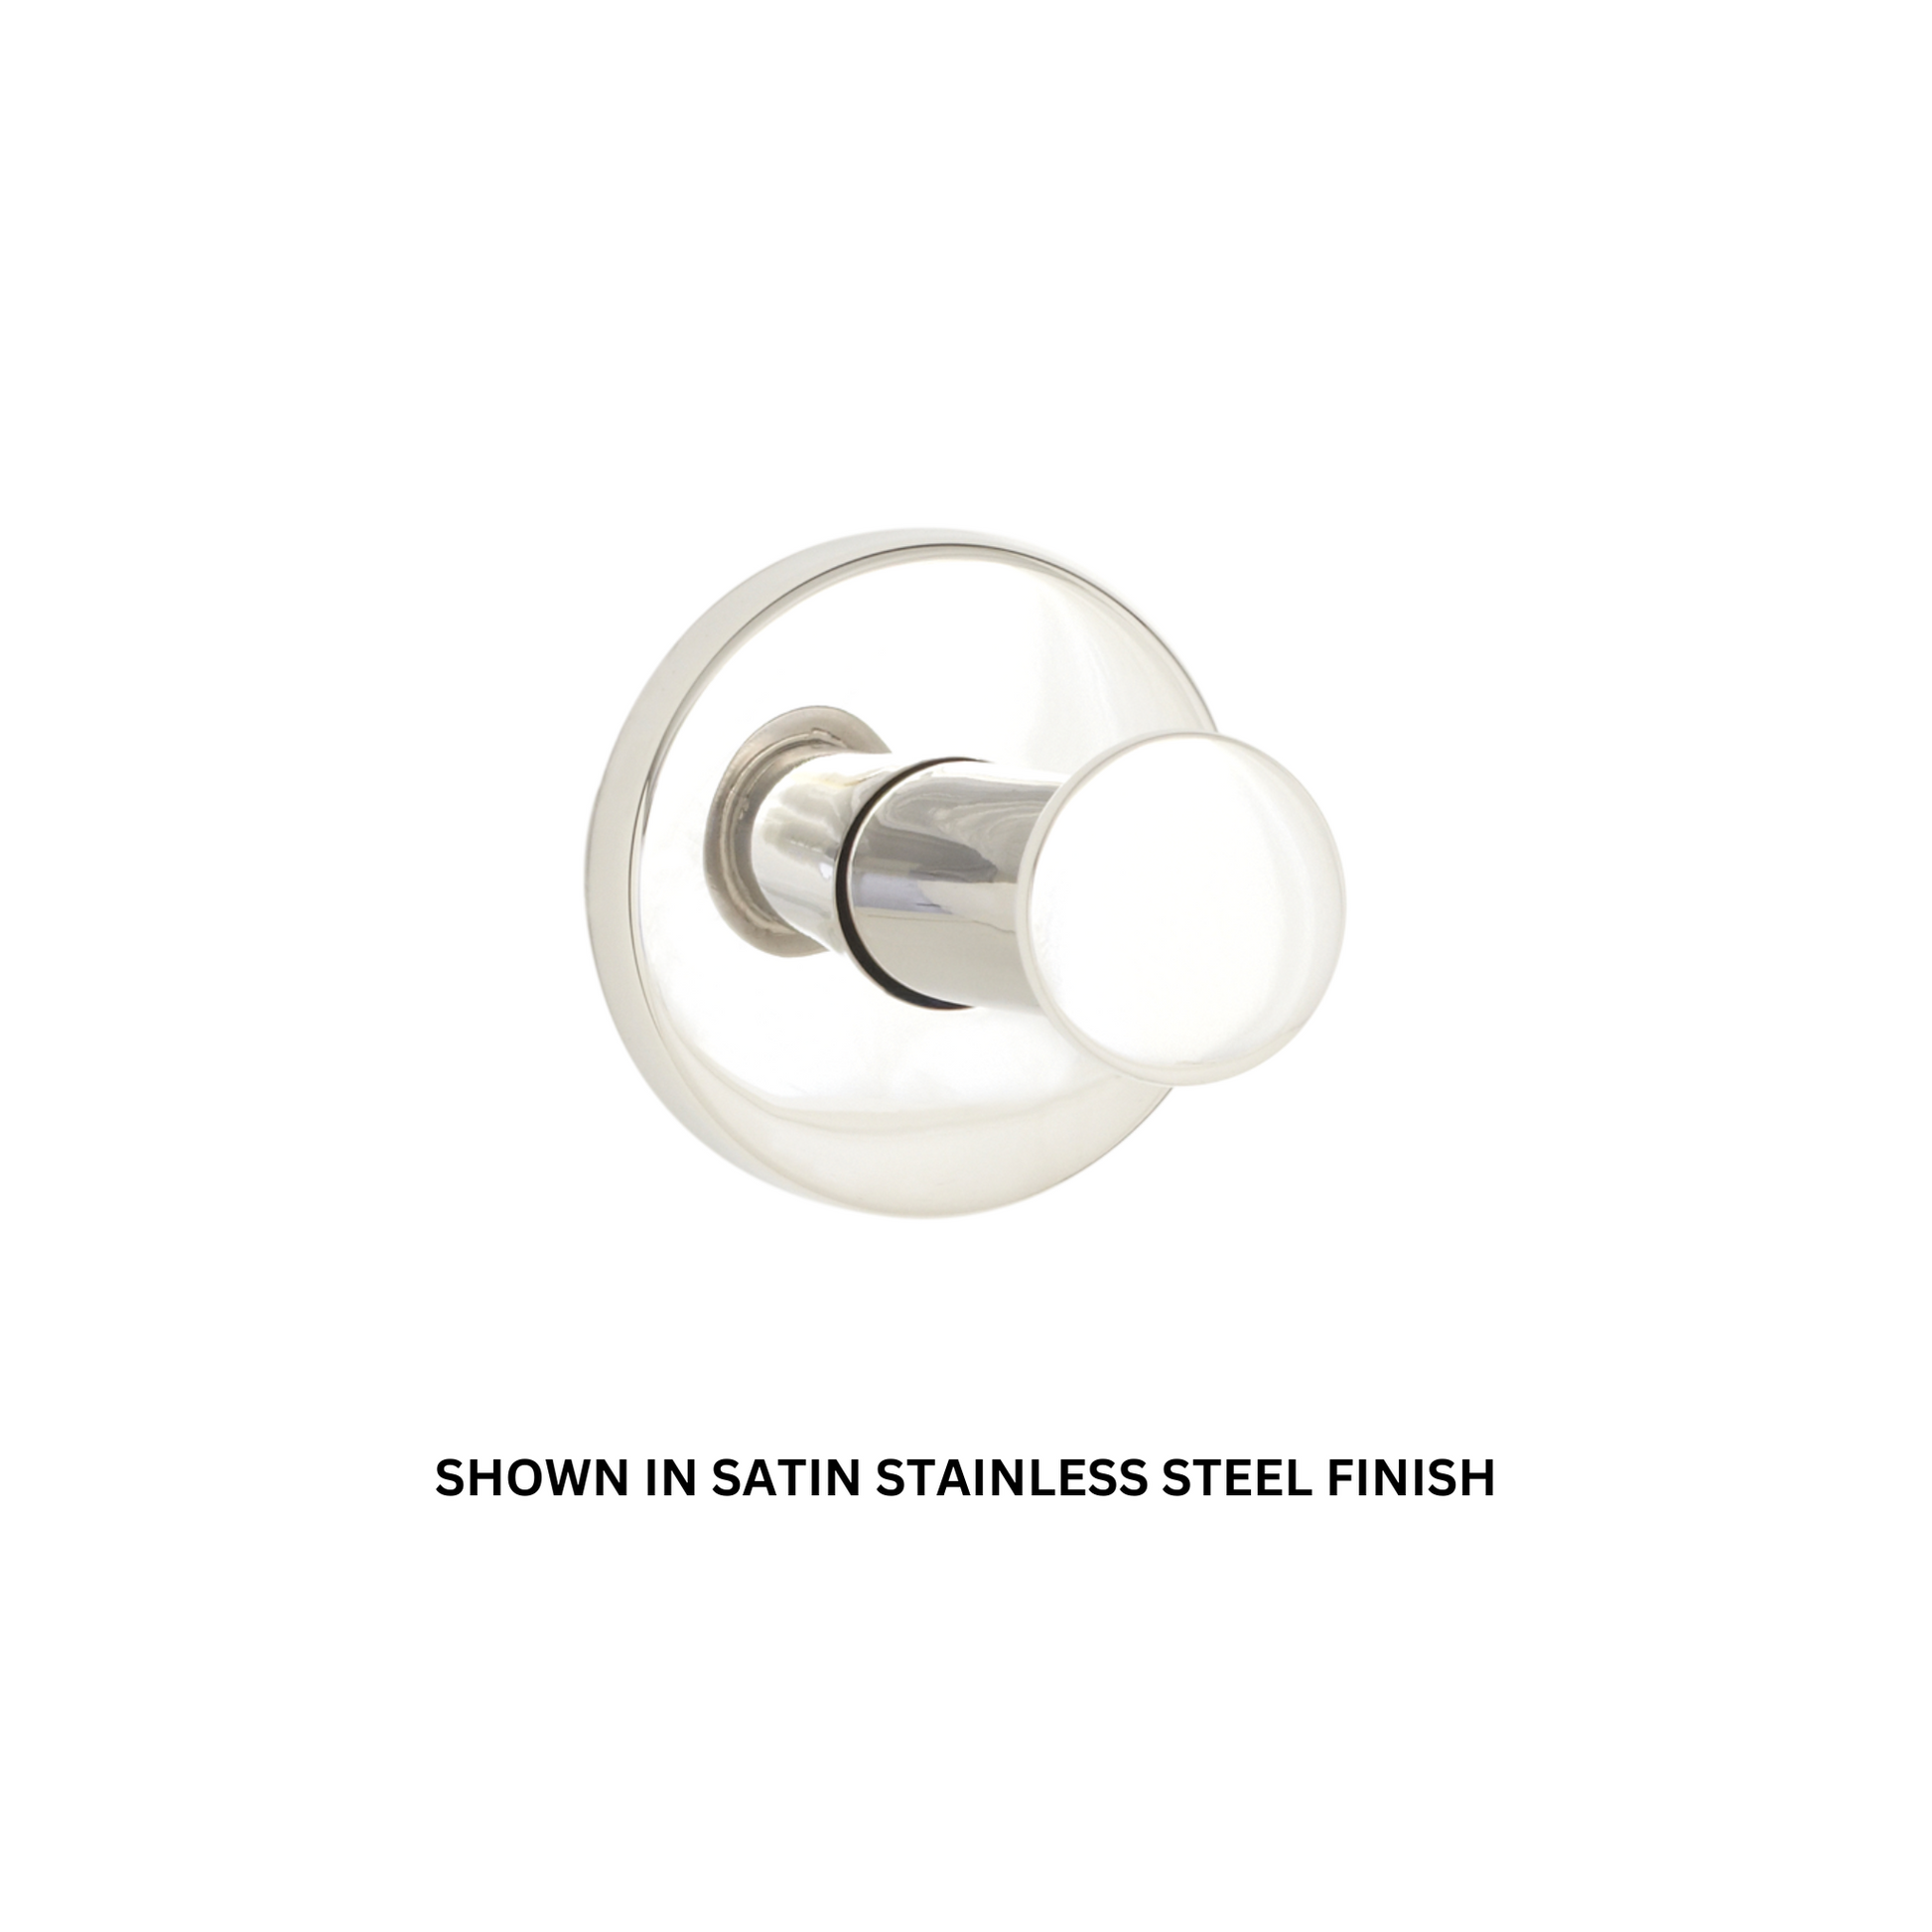 Seachrome Conorado Series 2.5" Biscuit Powder Coat Concealed Mounting Flange Single Robe Hook